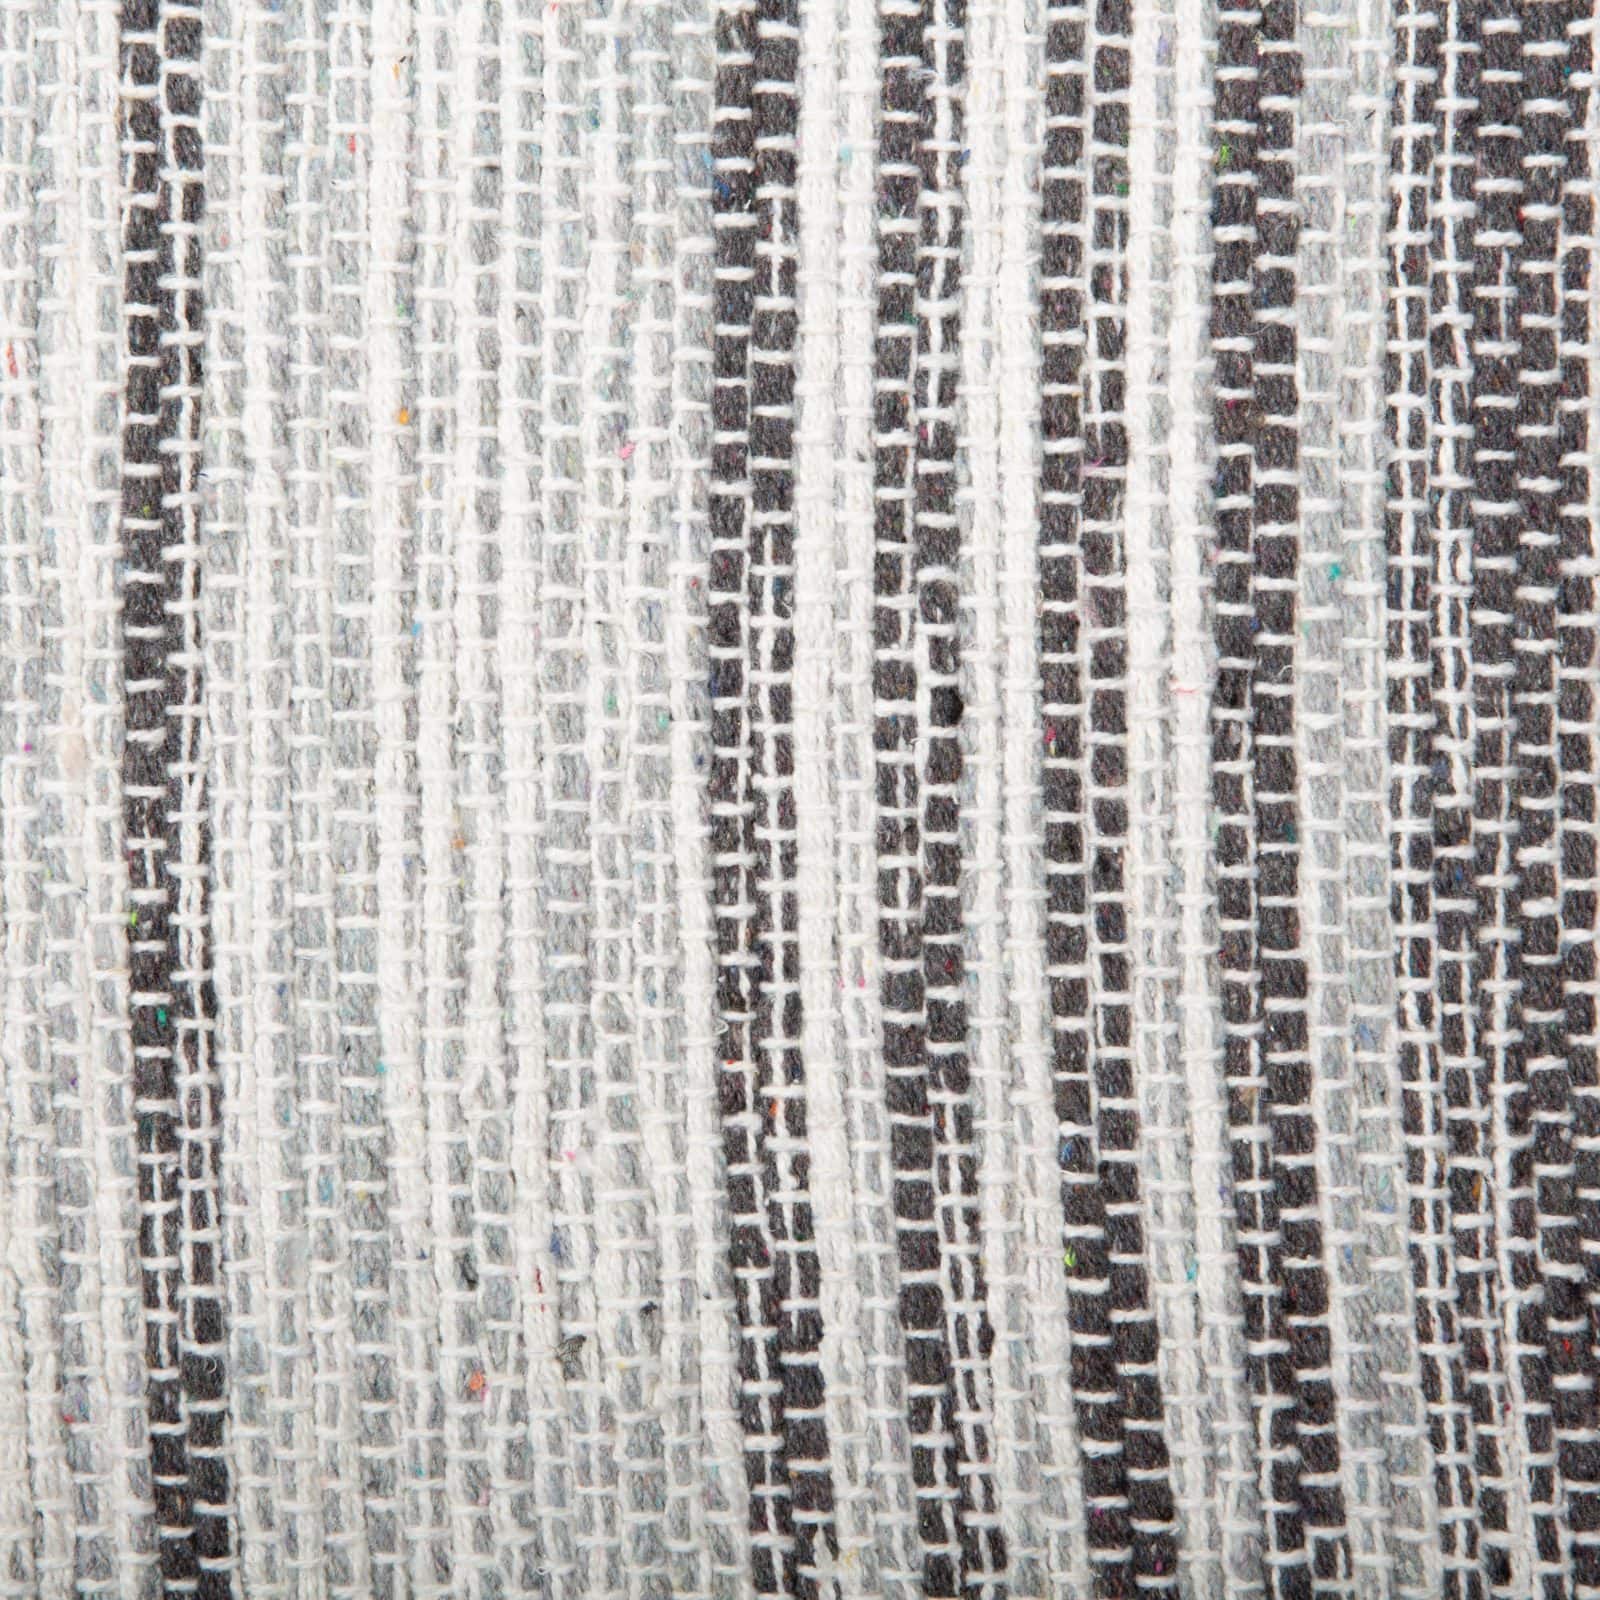 Blue Varigated Details about   DII VARIEGATED RECYCLED YARN 2x3 FT Rug 